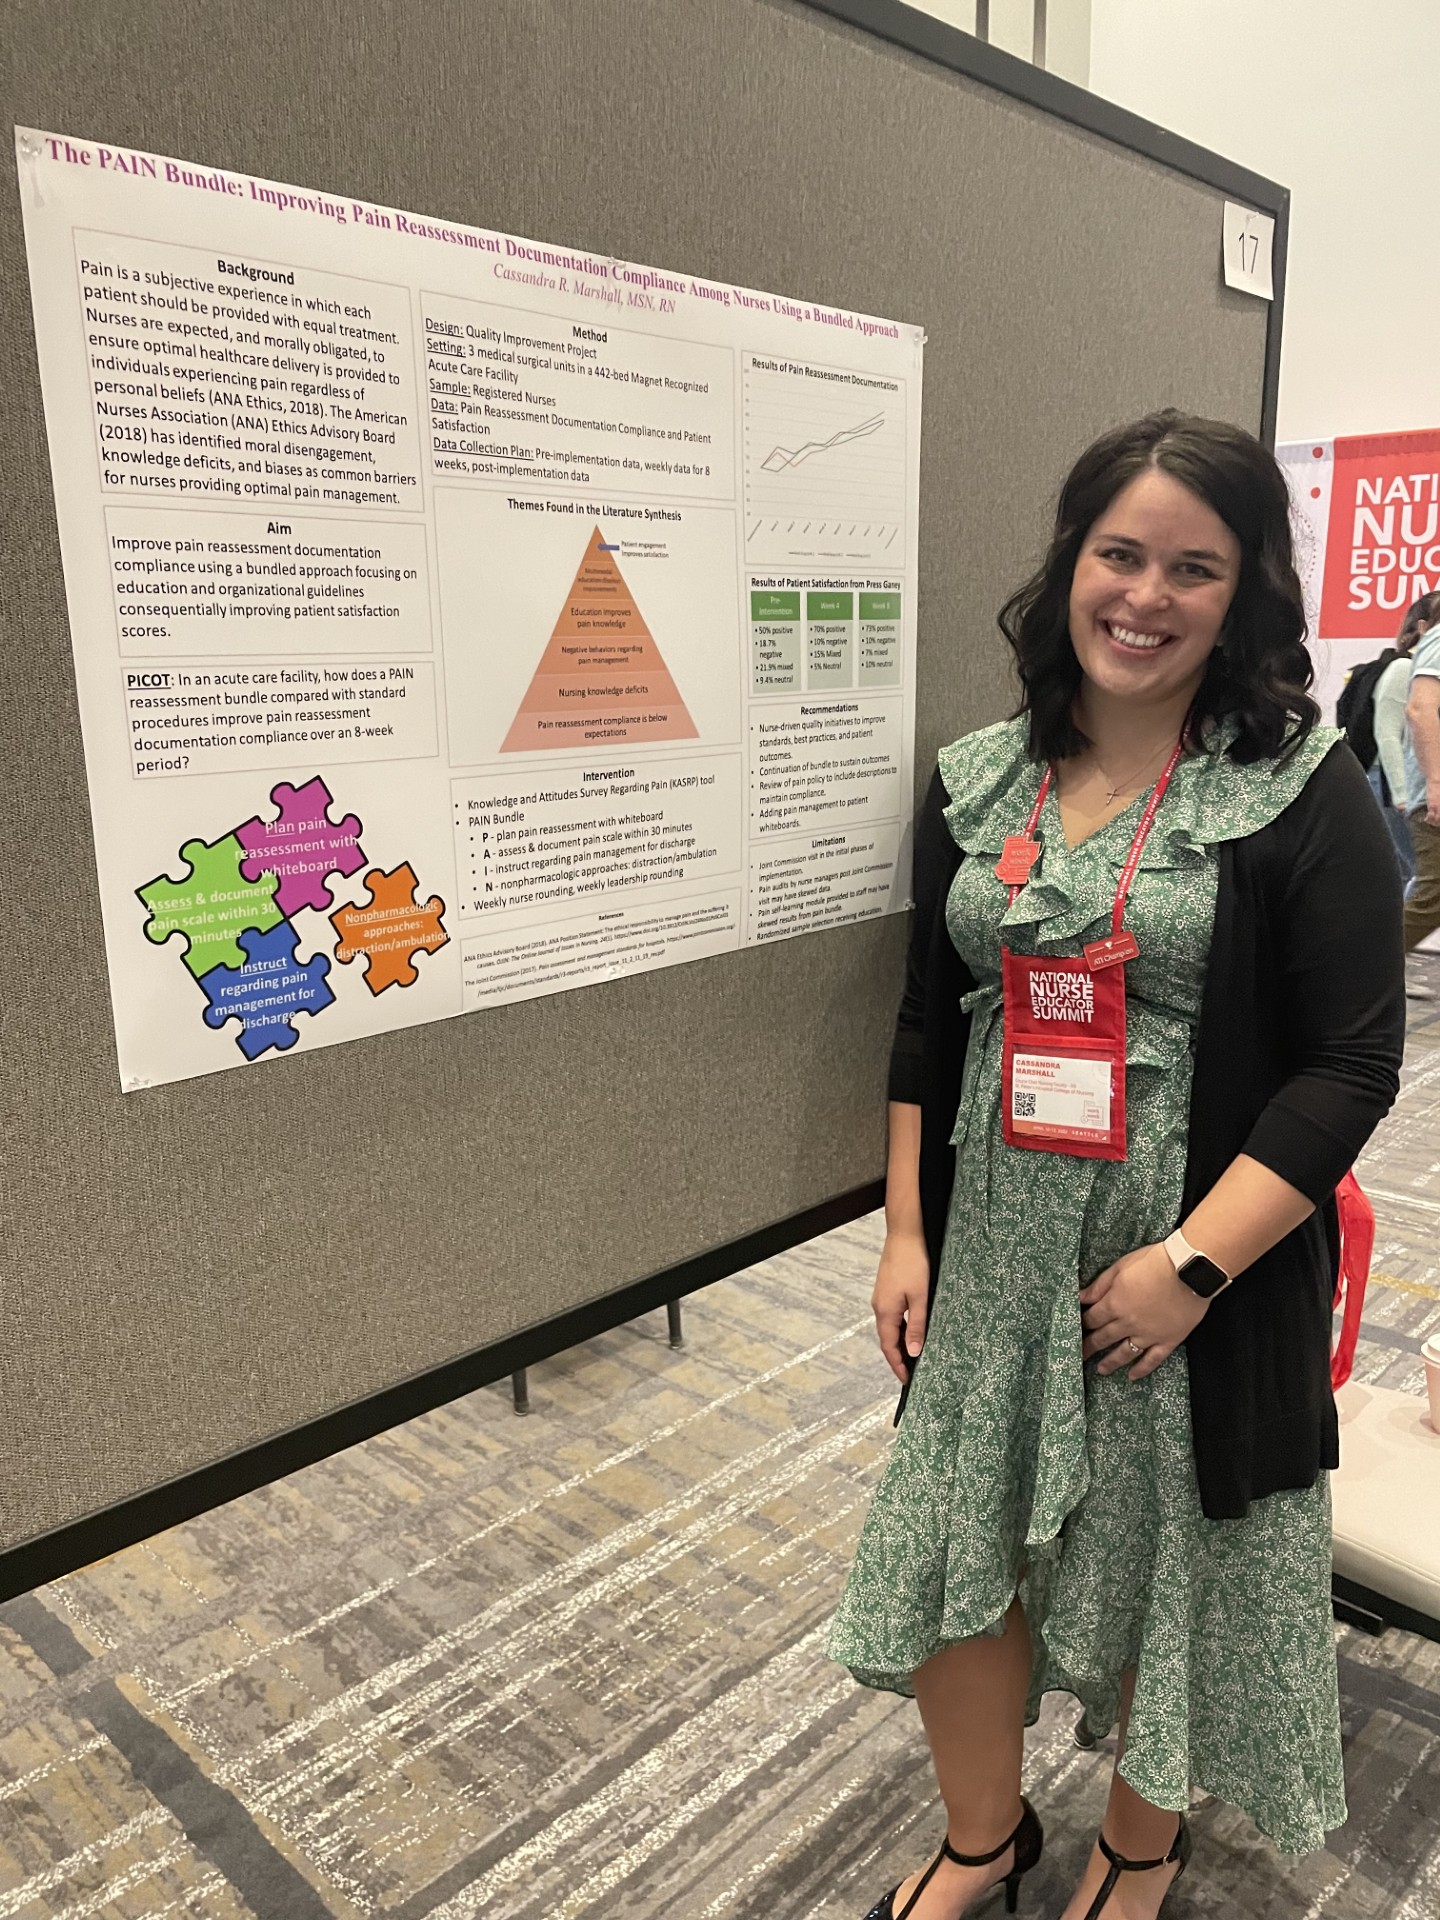 Marshall, wearing a green sundress and black cardigan, stands beside her poster at the National Nurse Education Summit. Her poster is titled “The PAIN Bundle: Improving Pain reassessment Documentation Compliance Among Nurses Using a Bundled Approach.” The poster is tacked to a gray display board. 